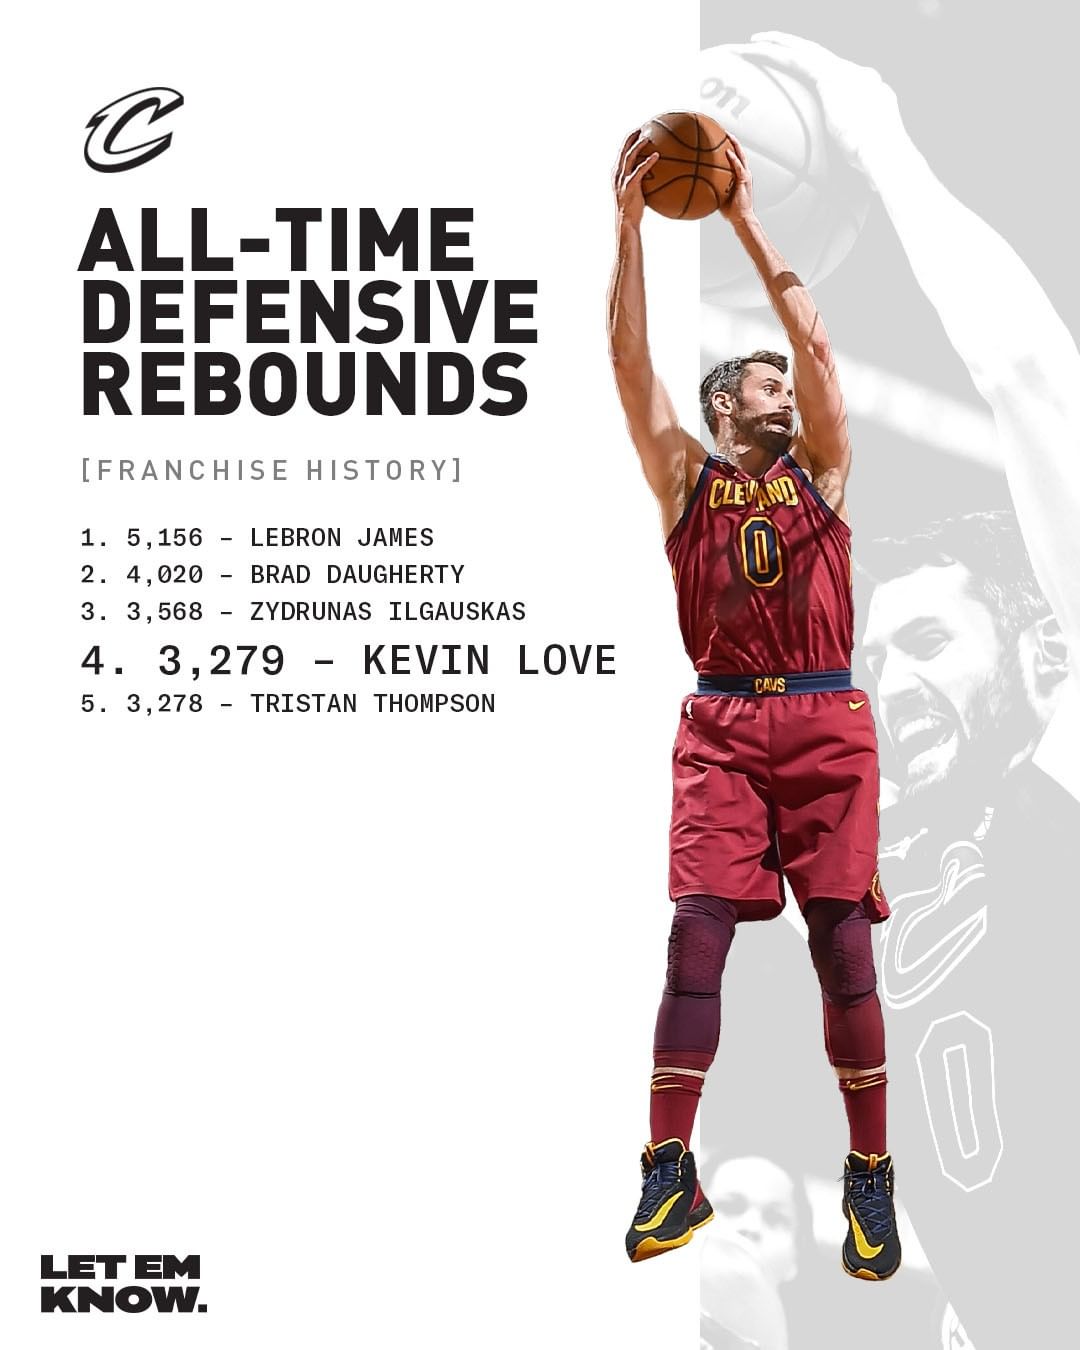 11 boards on the defensive end last night moved @kevinlove into 4th place on the...